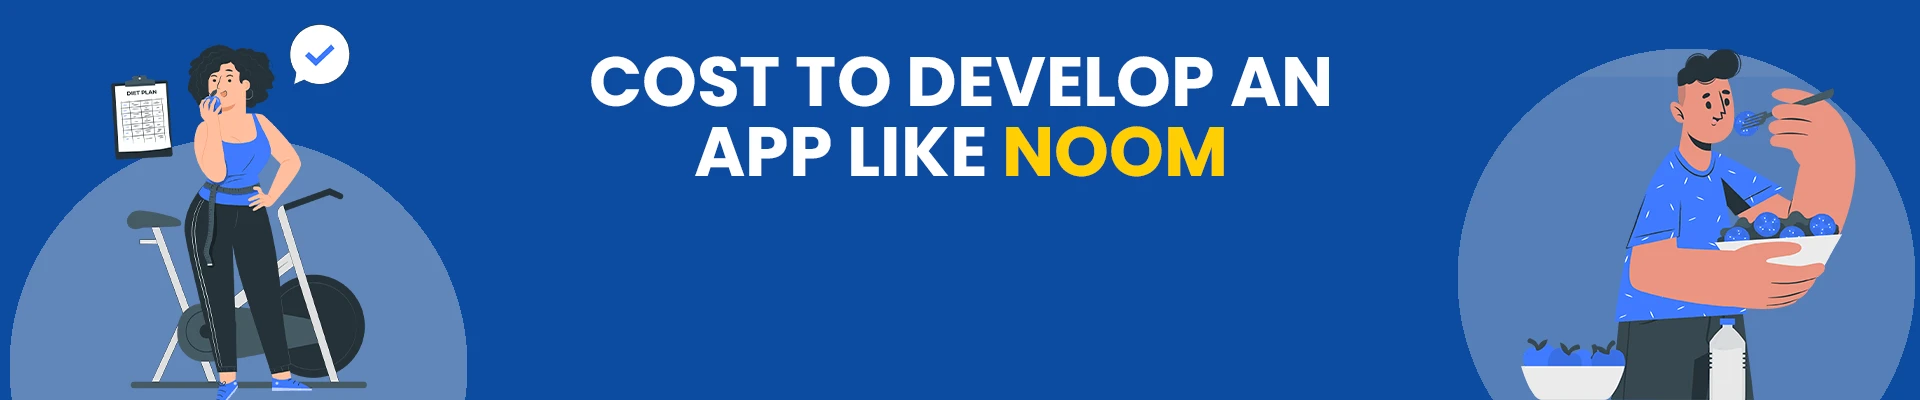 How Much Does It Cost To Develop An App Like Noom?